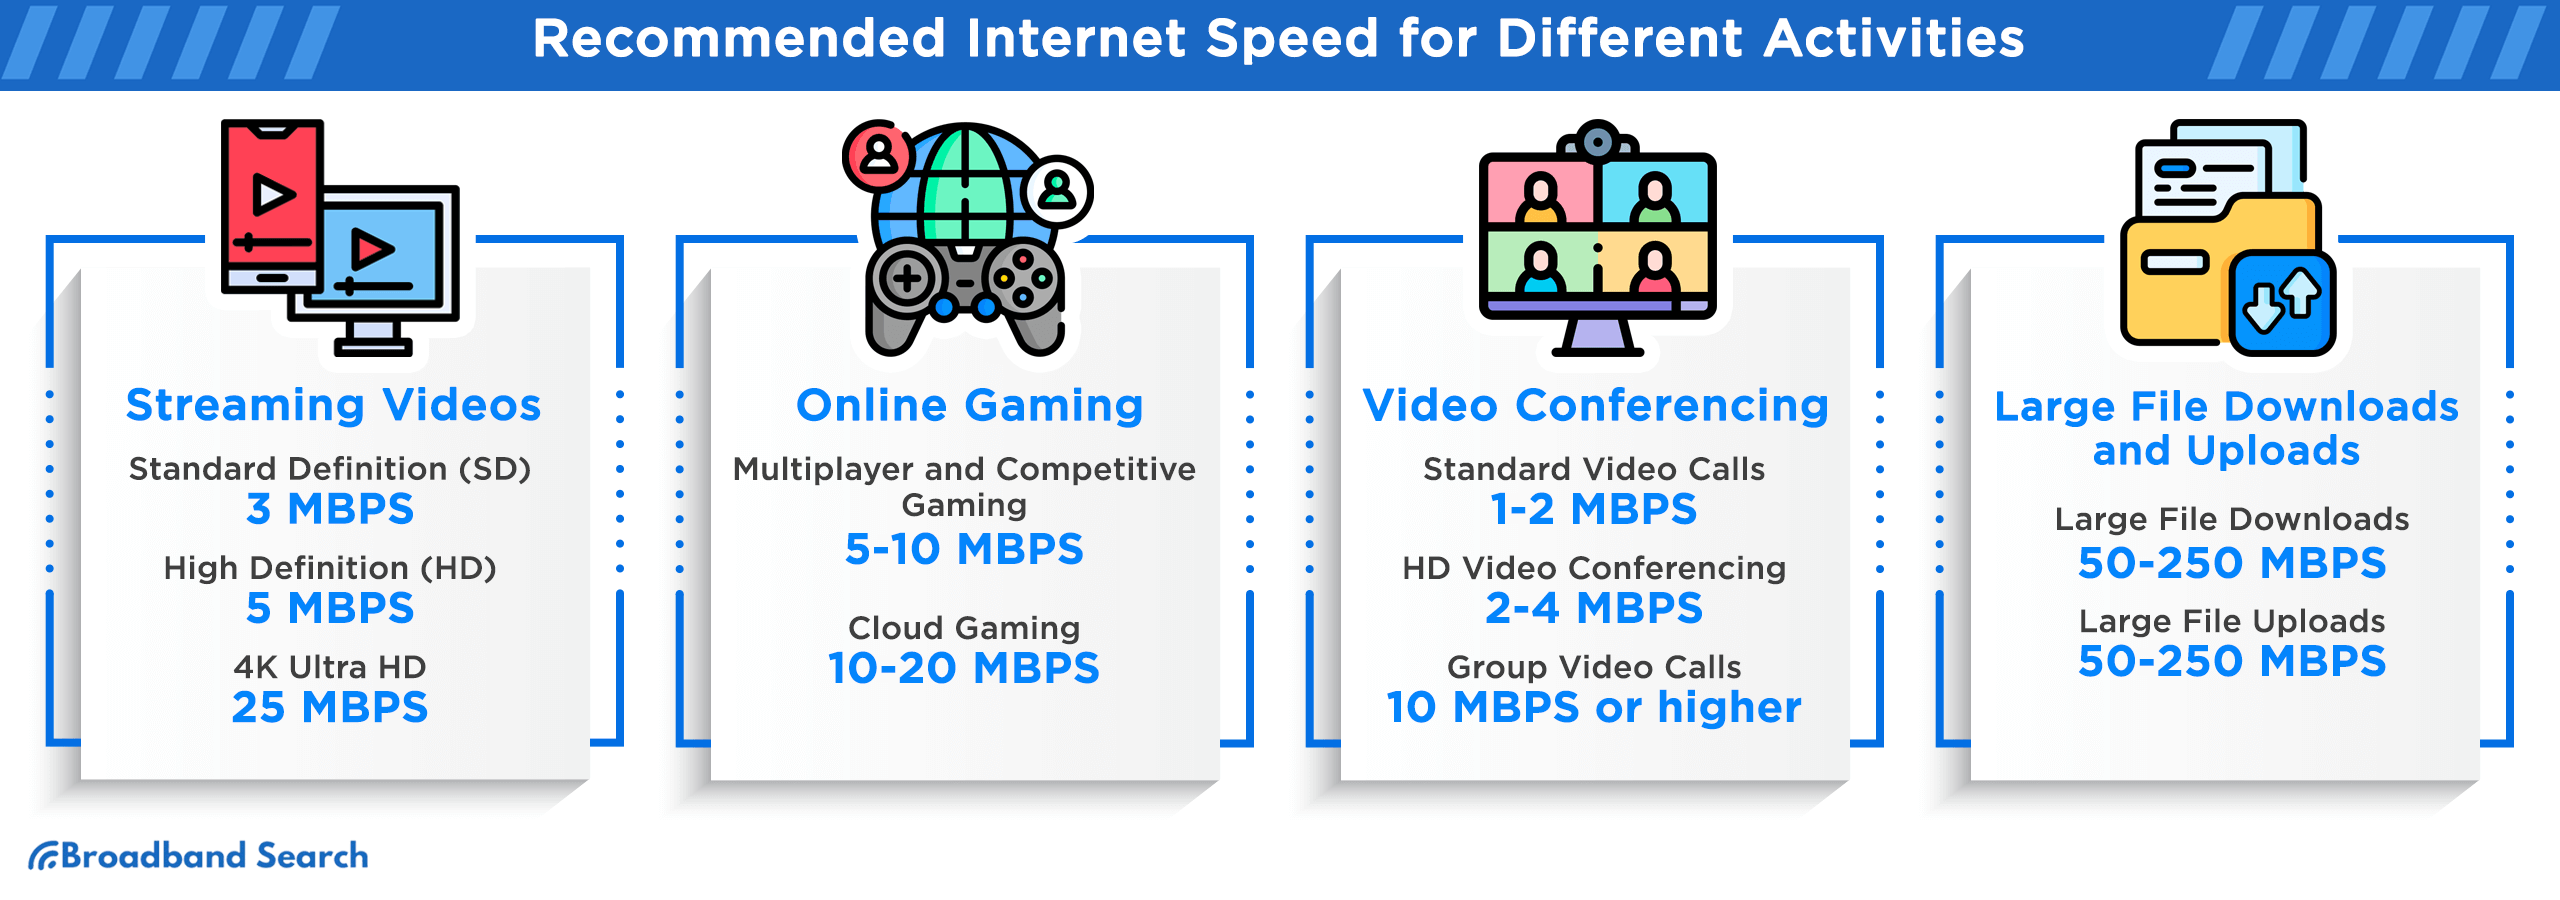 Recommended internet speed for different activities